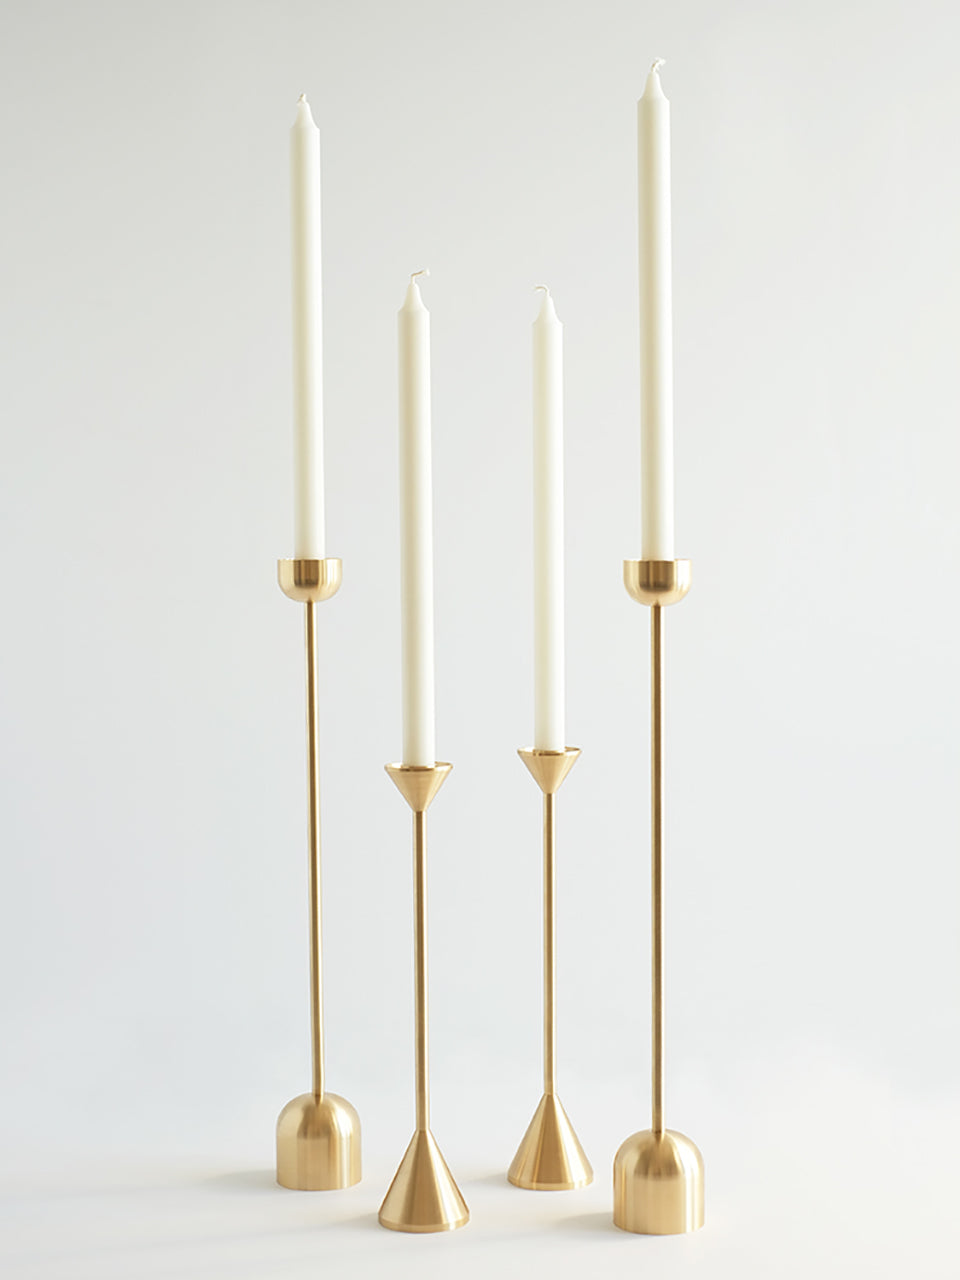 Cone Spindle Candle Holder (2 Sizes)